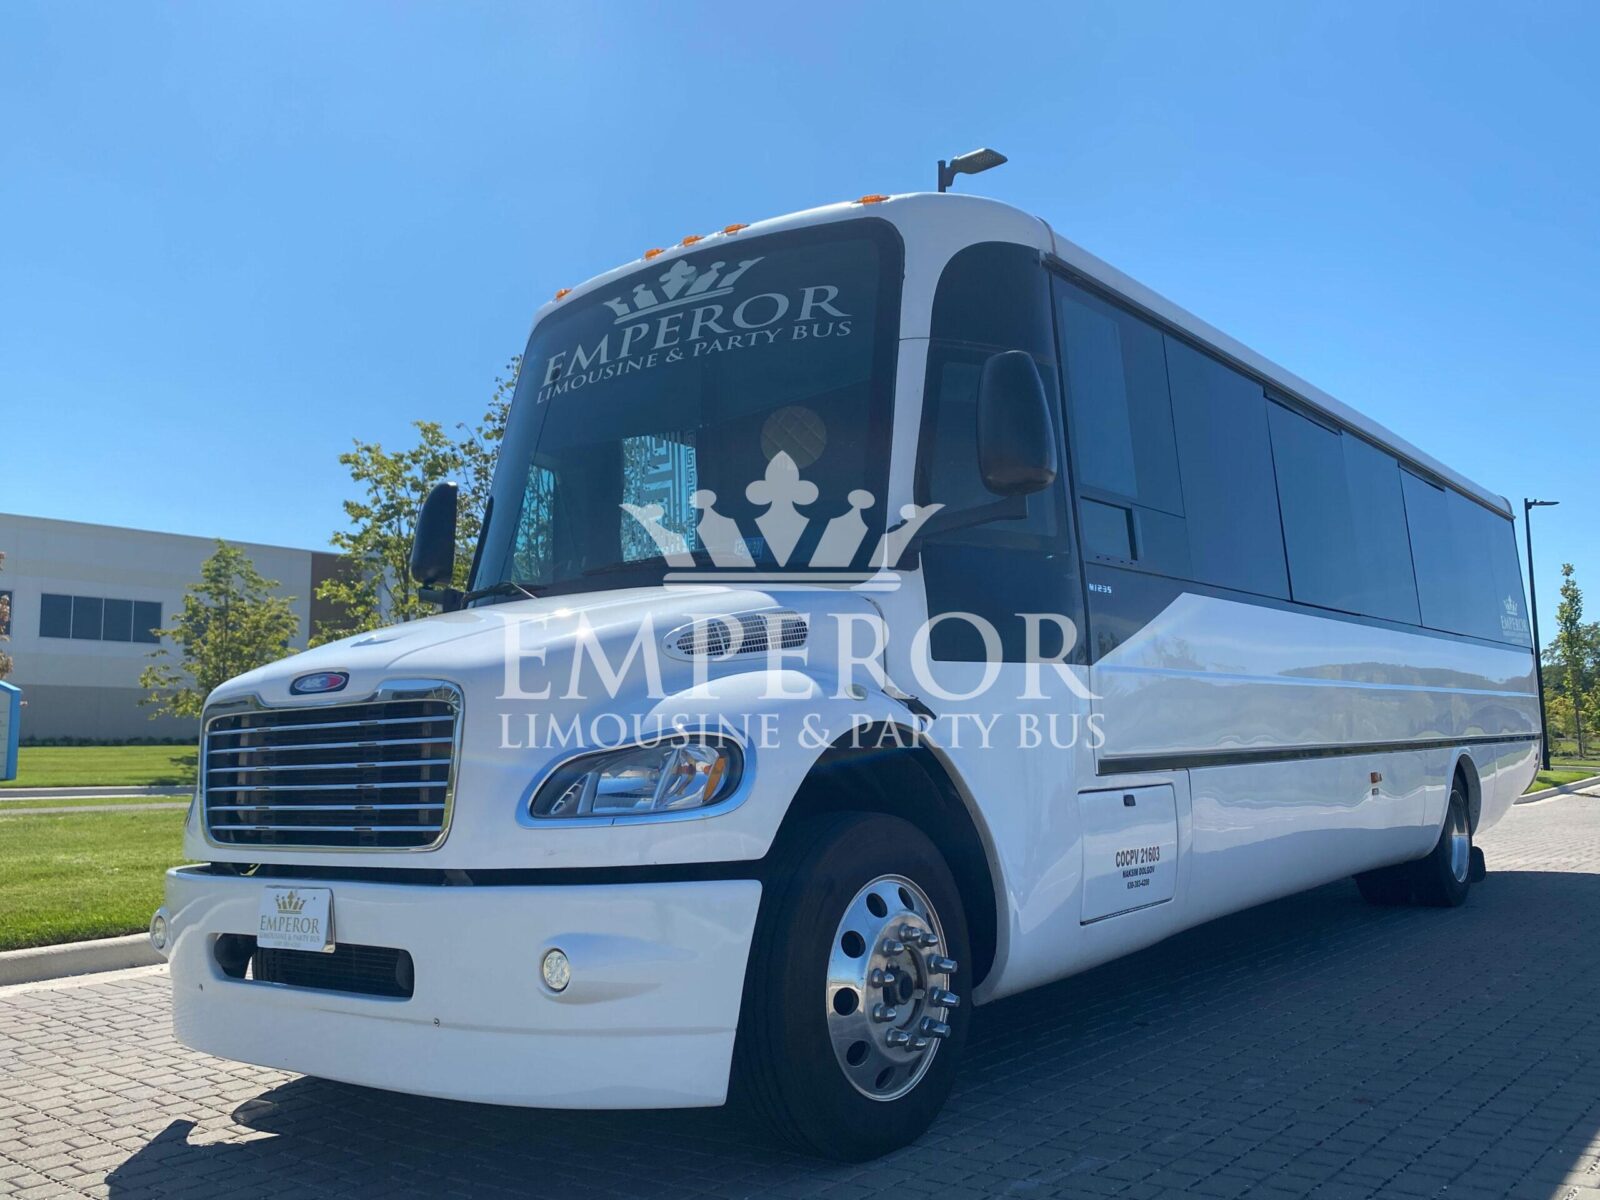 Party bus rental service in Lombard